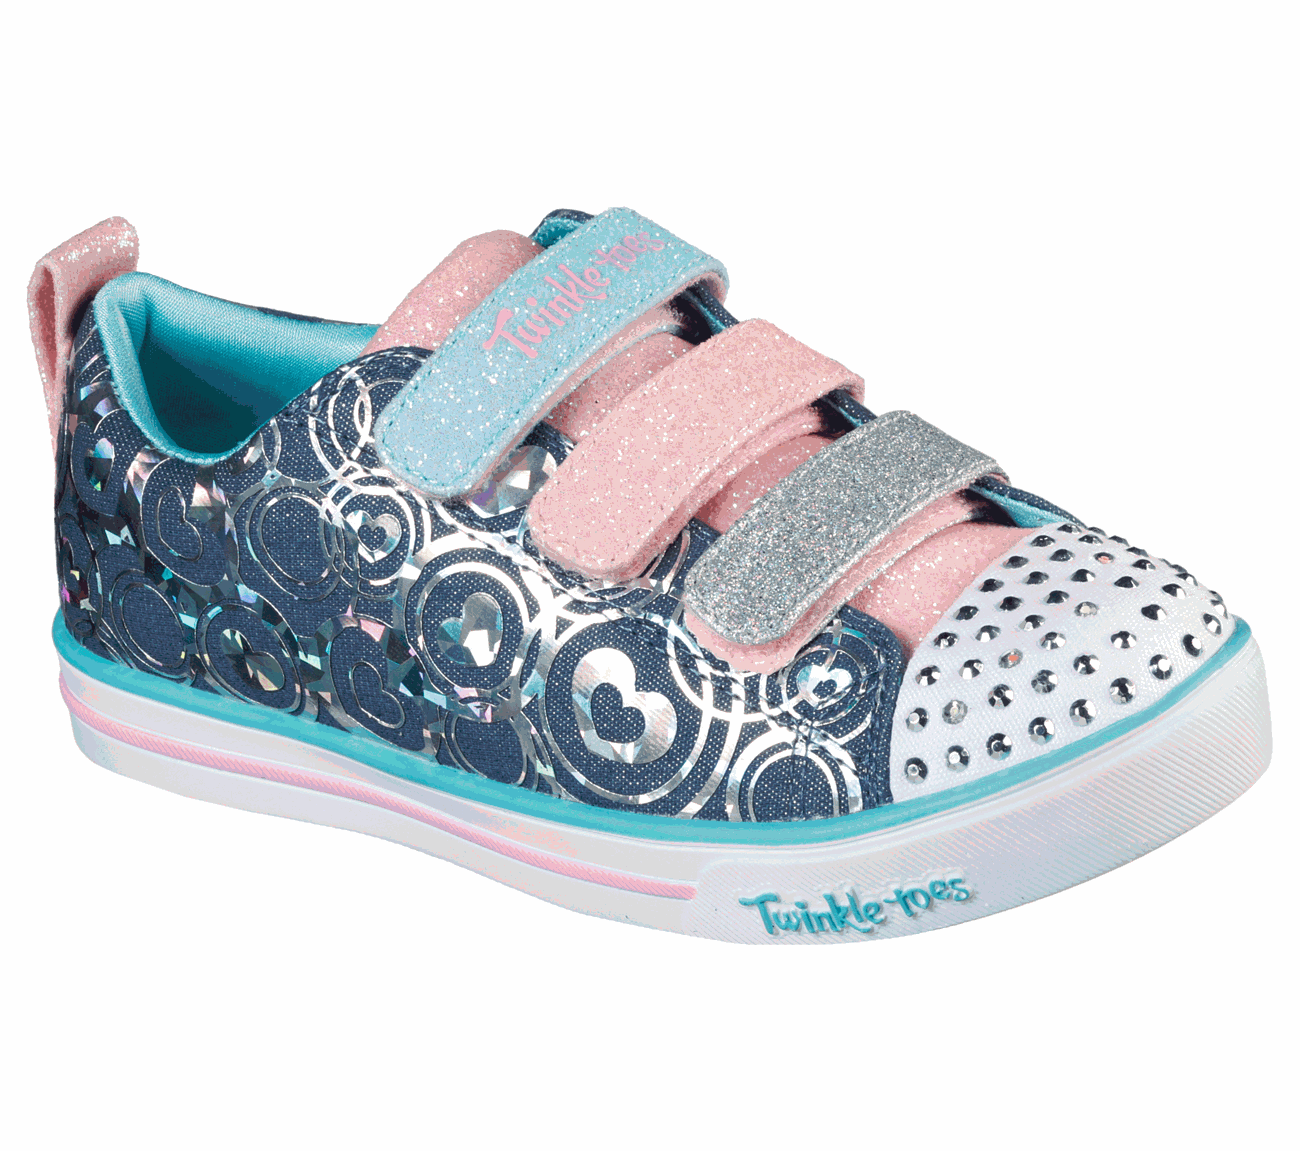 twinkle toes sparkle lite